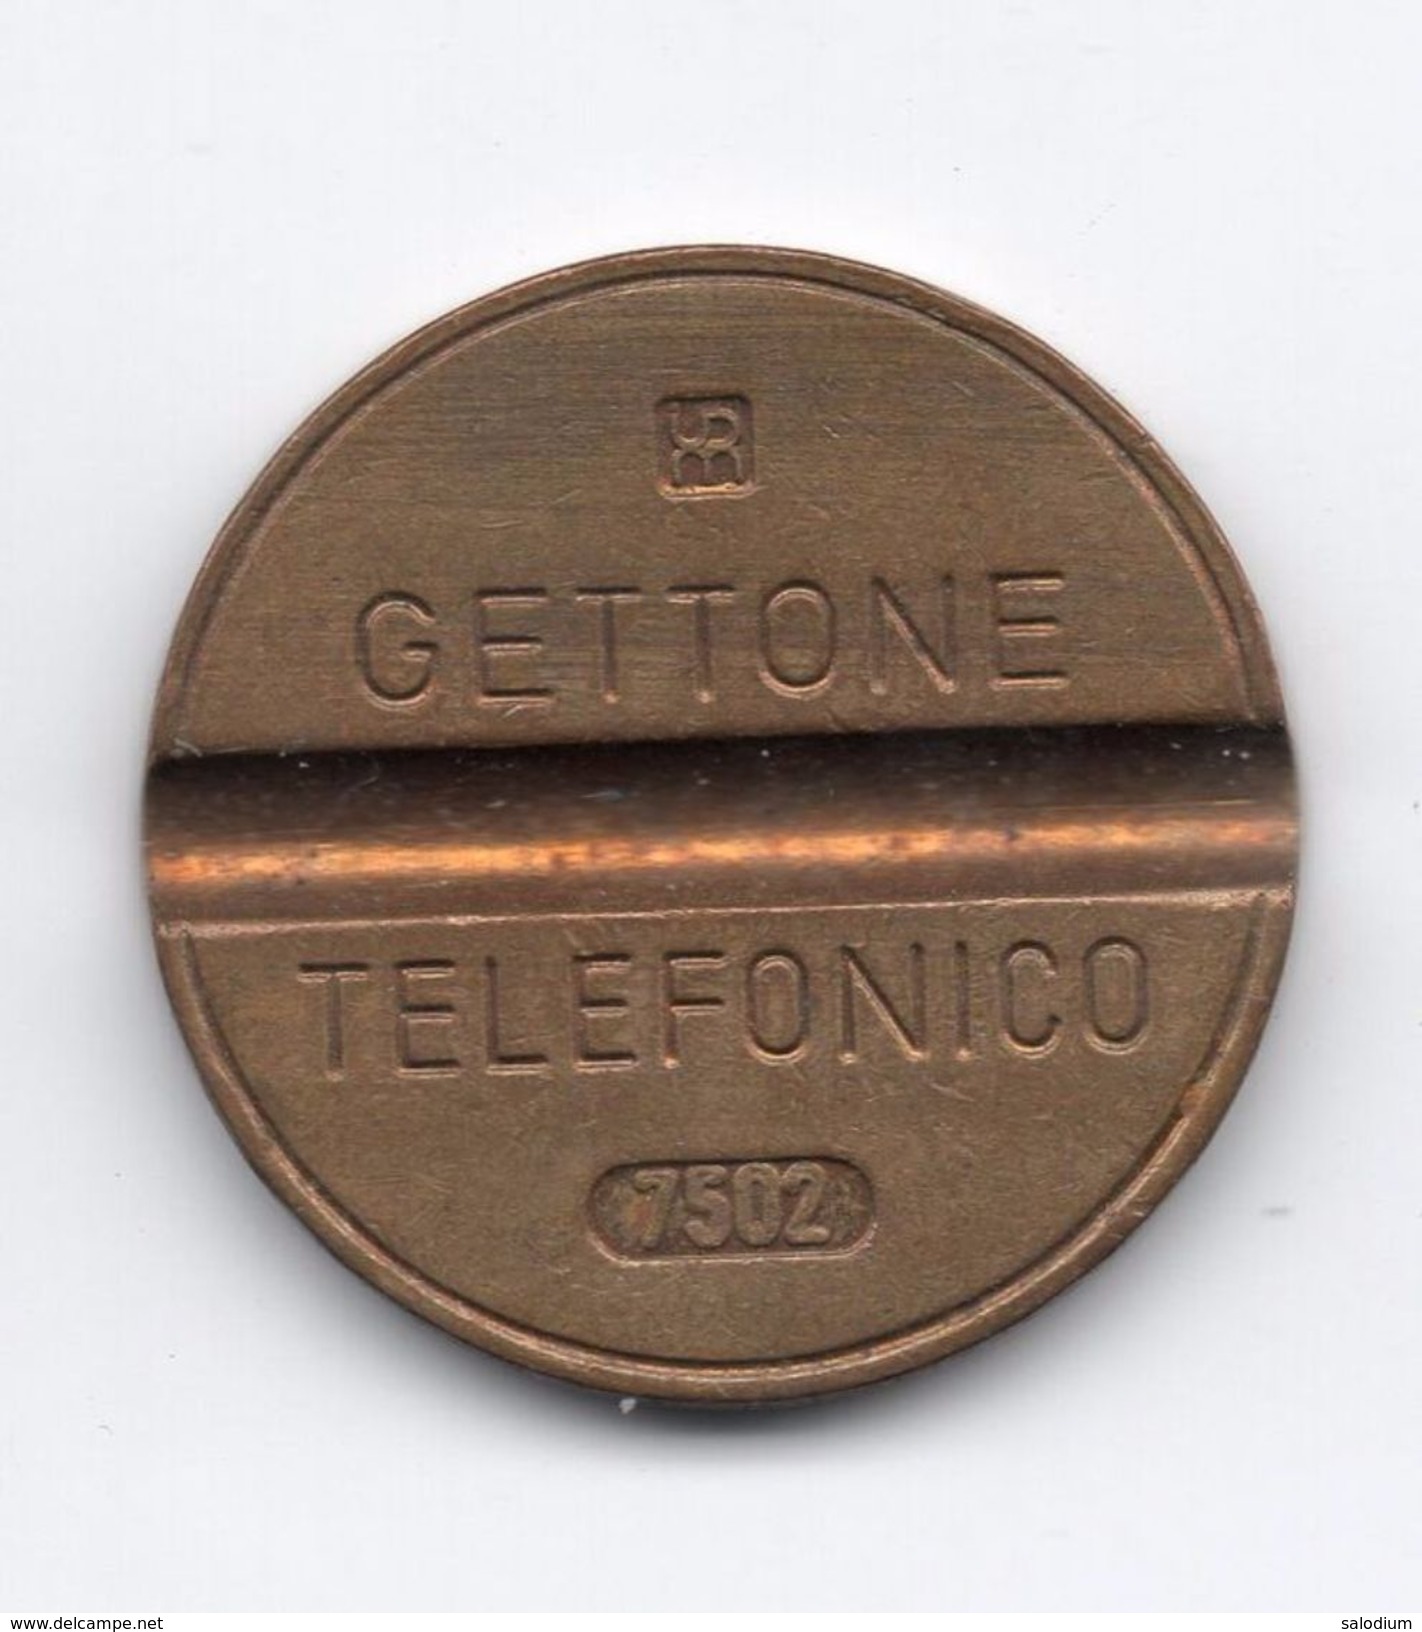 Gettone Telefonico 7502 Token Telephone - (Id-758) - Professionals/Firms